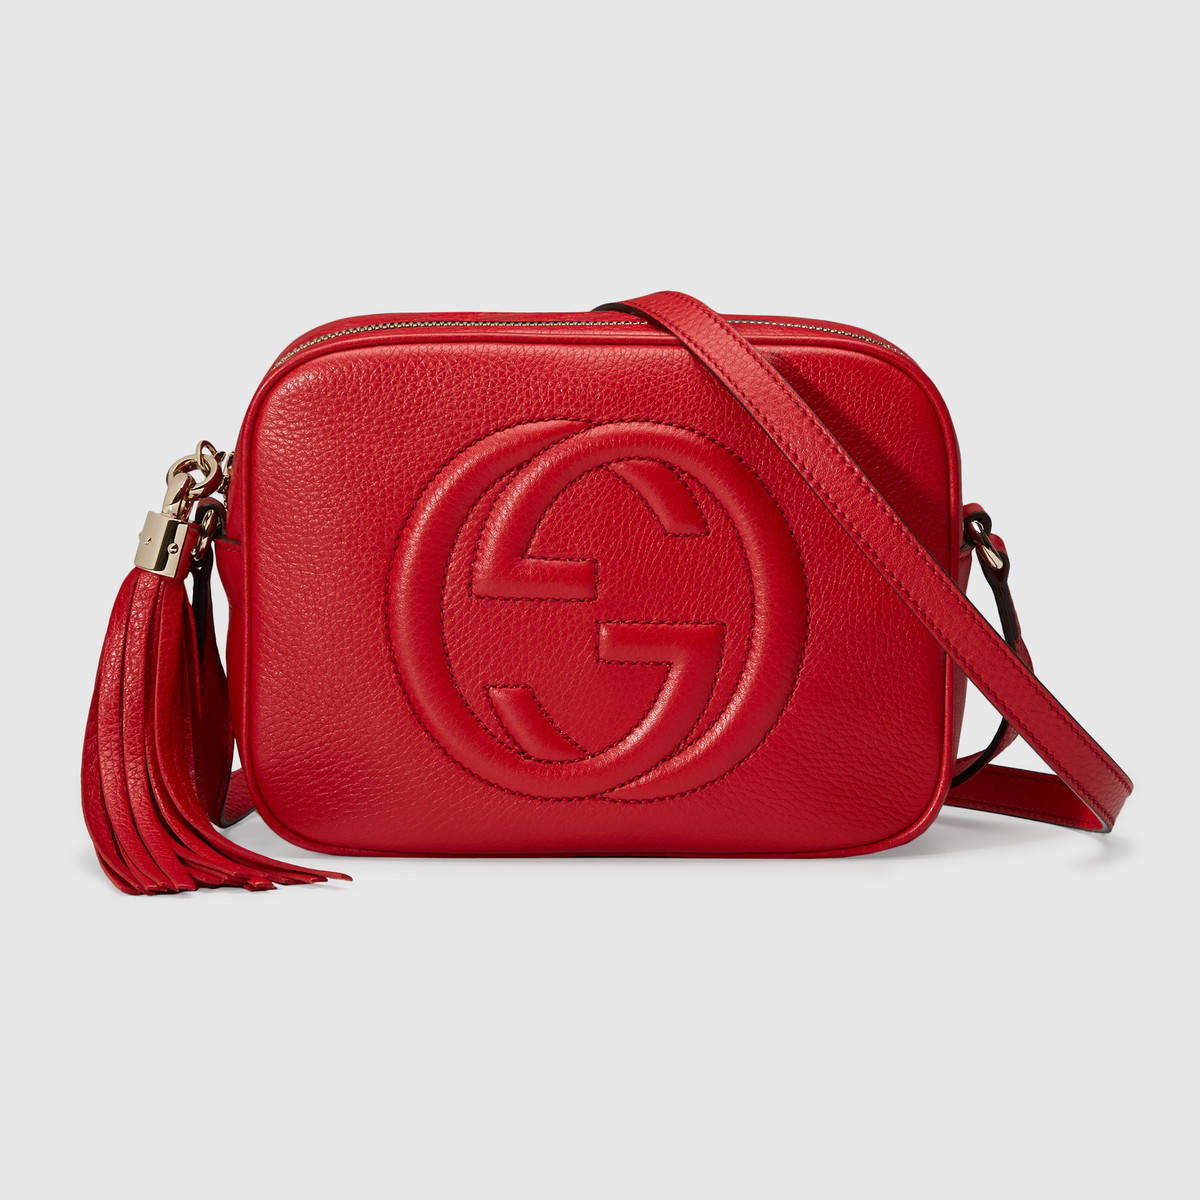 Gucci Smooth Leather Bag Literacy Basics